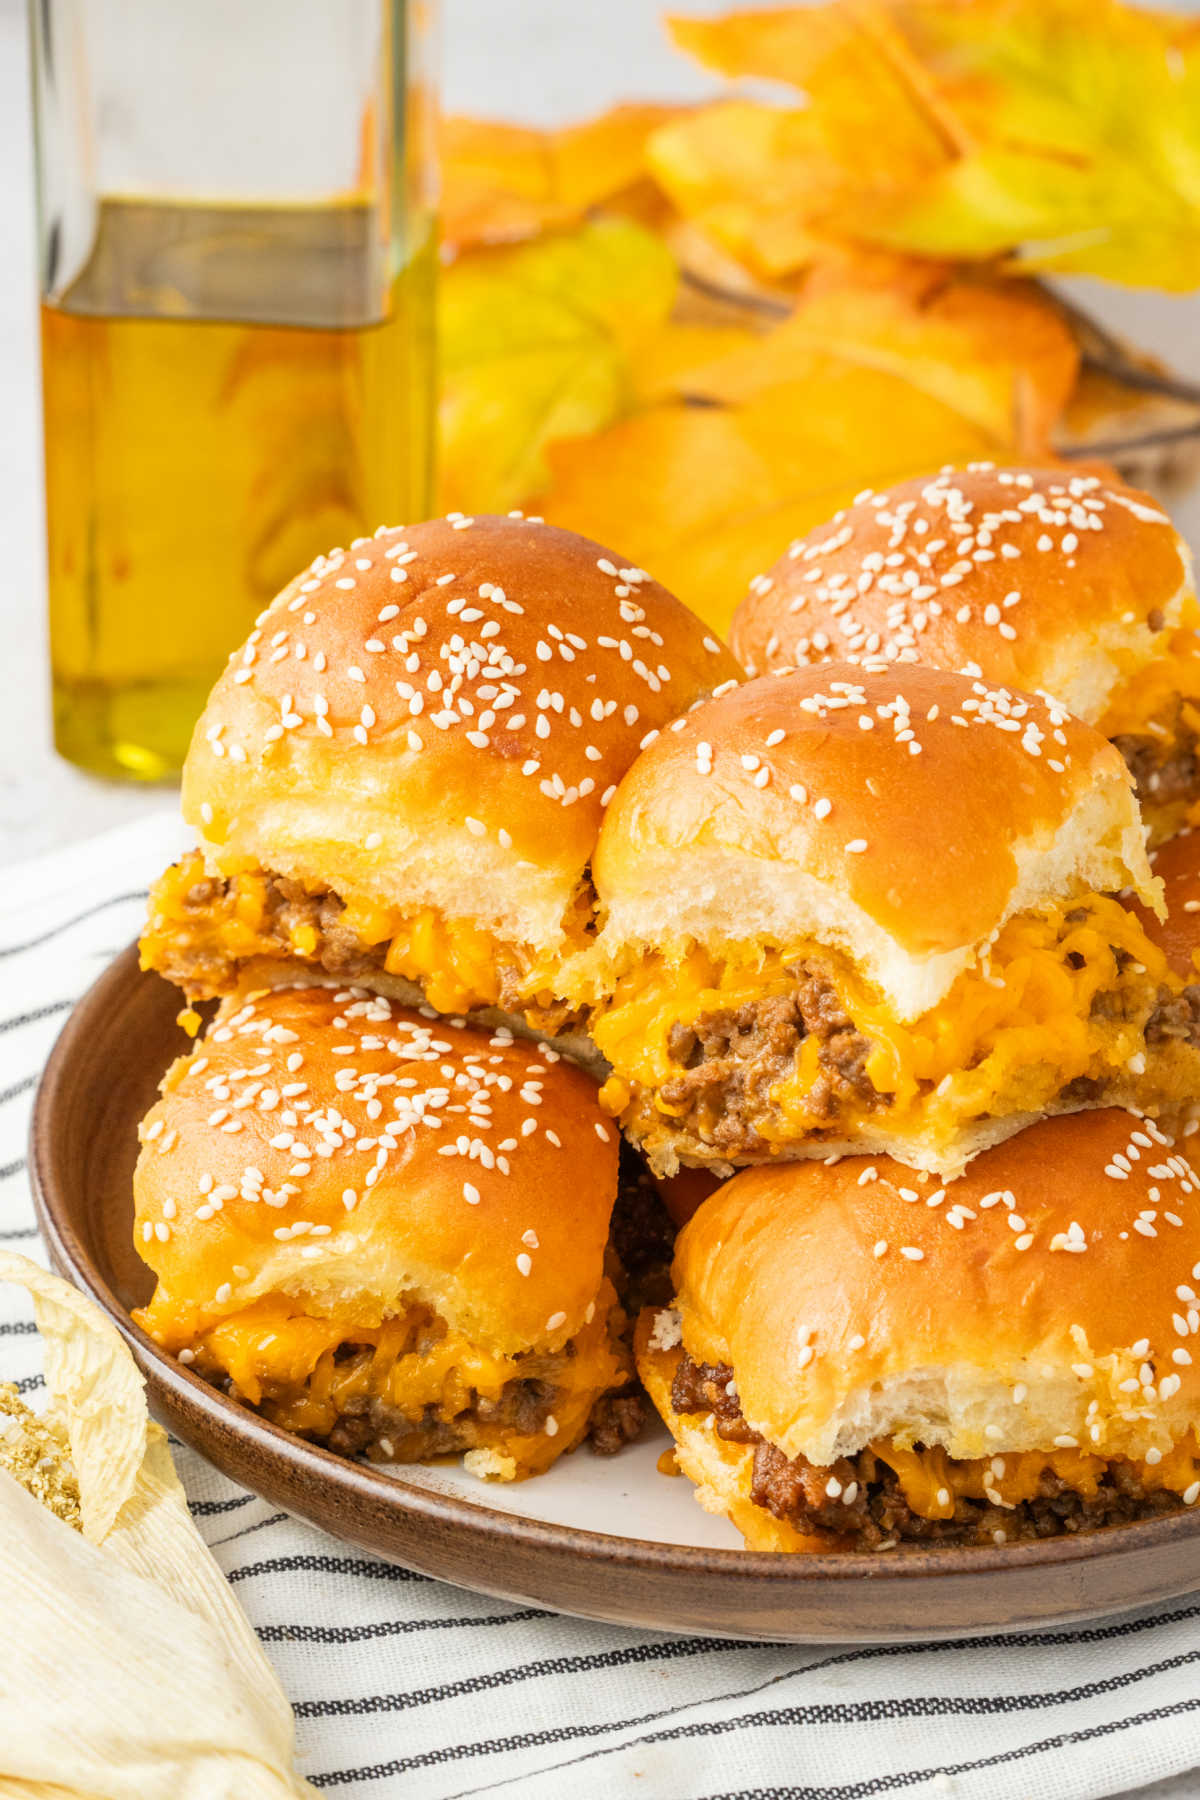 A pile of cheeseburger sliders on a plate.